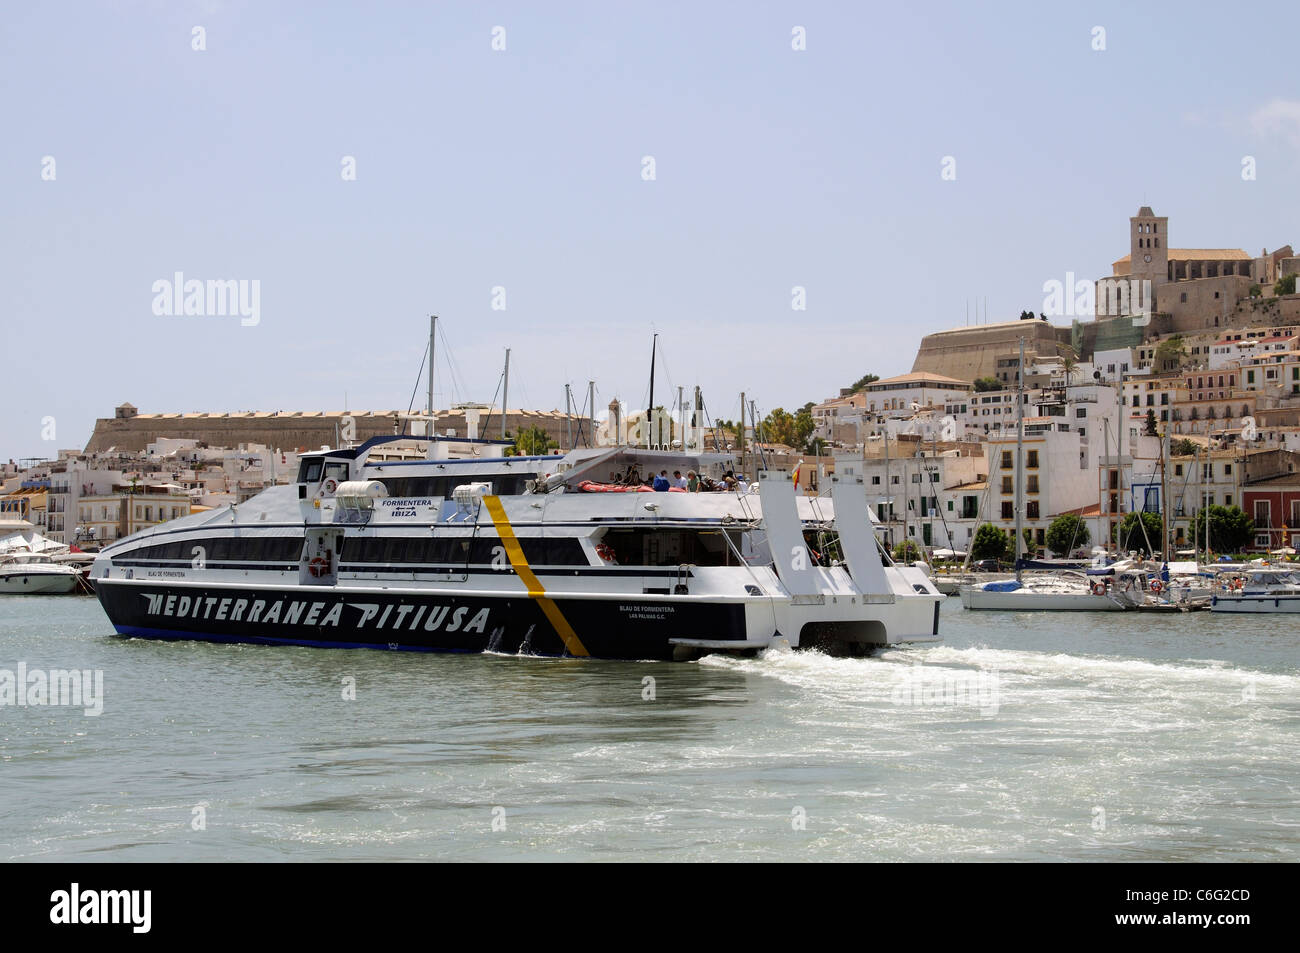 Inter island fast ferry departing the harbour overlooked by the old town of Eivissa on the Spanish Island of Ibiza Stock Photo